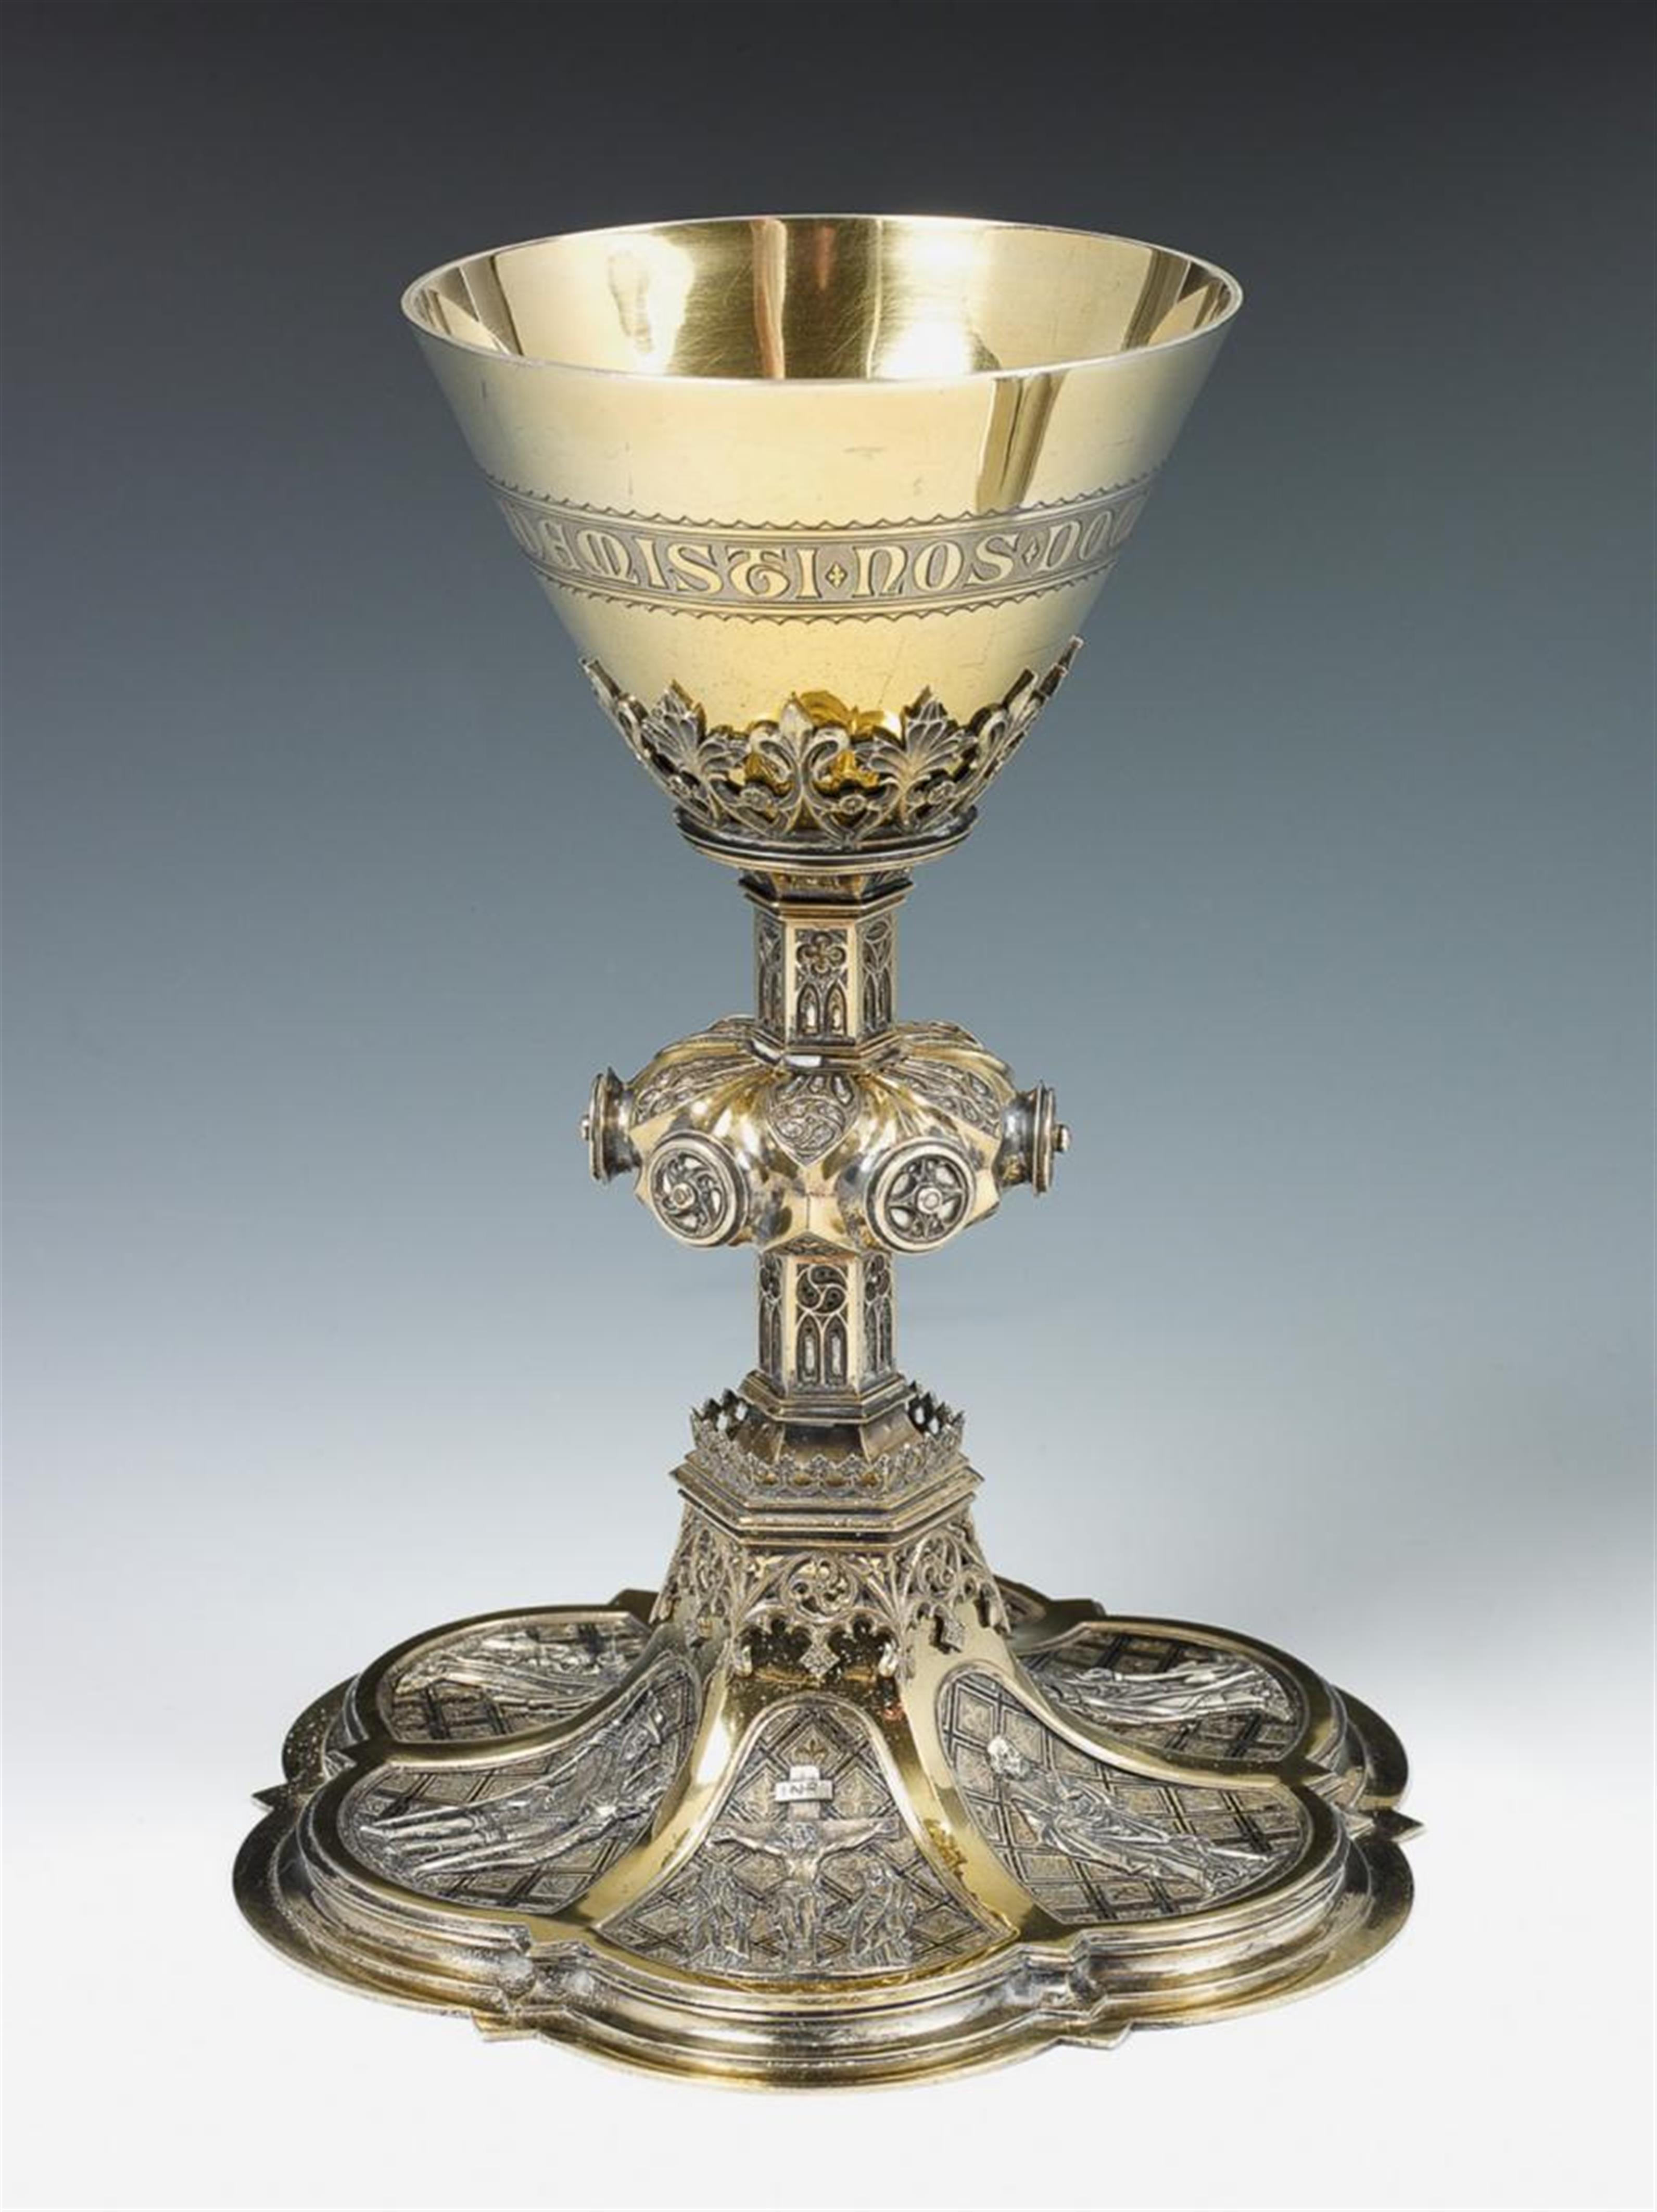 A Cologne silver partially gilt Gothic revival communion chalice. With a 19th C. French silver paten. Marks of Franz Xaver Hellner, 1898. - image-1